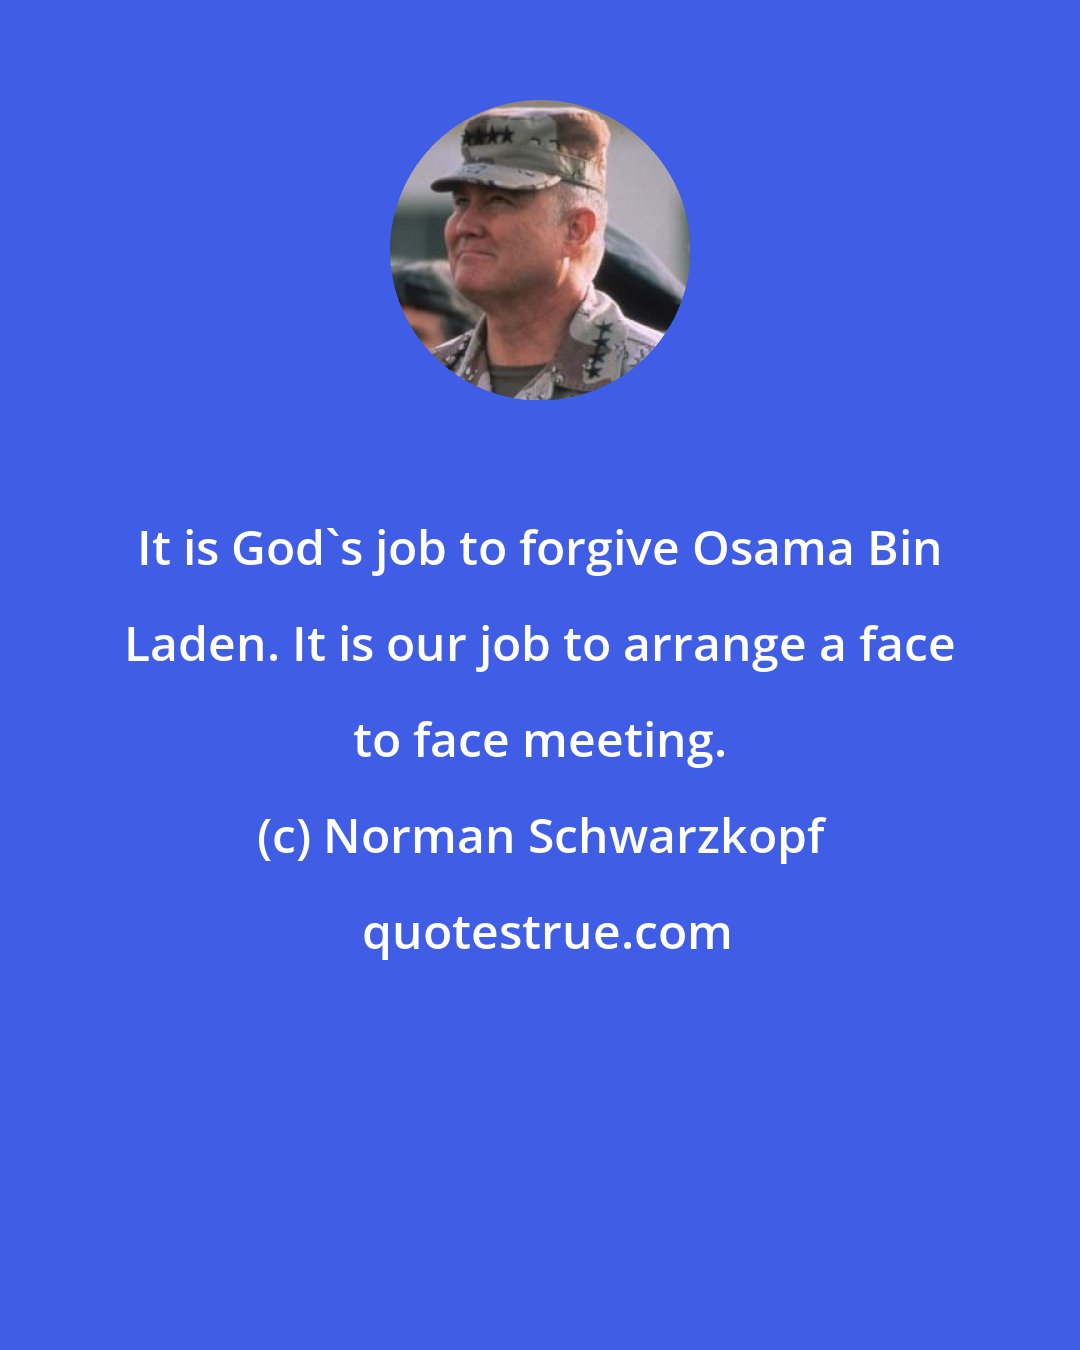 Norman Schwarzkopf: It is God's job to forgive Osama Bin Laden. It is our job to arrange a face to face meeting.